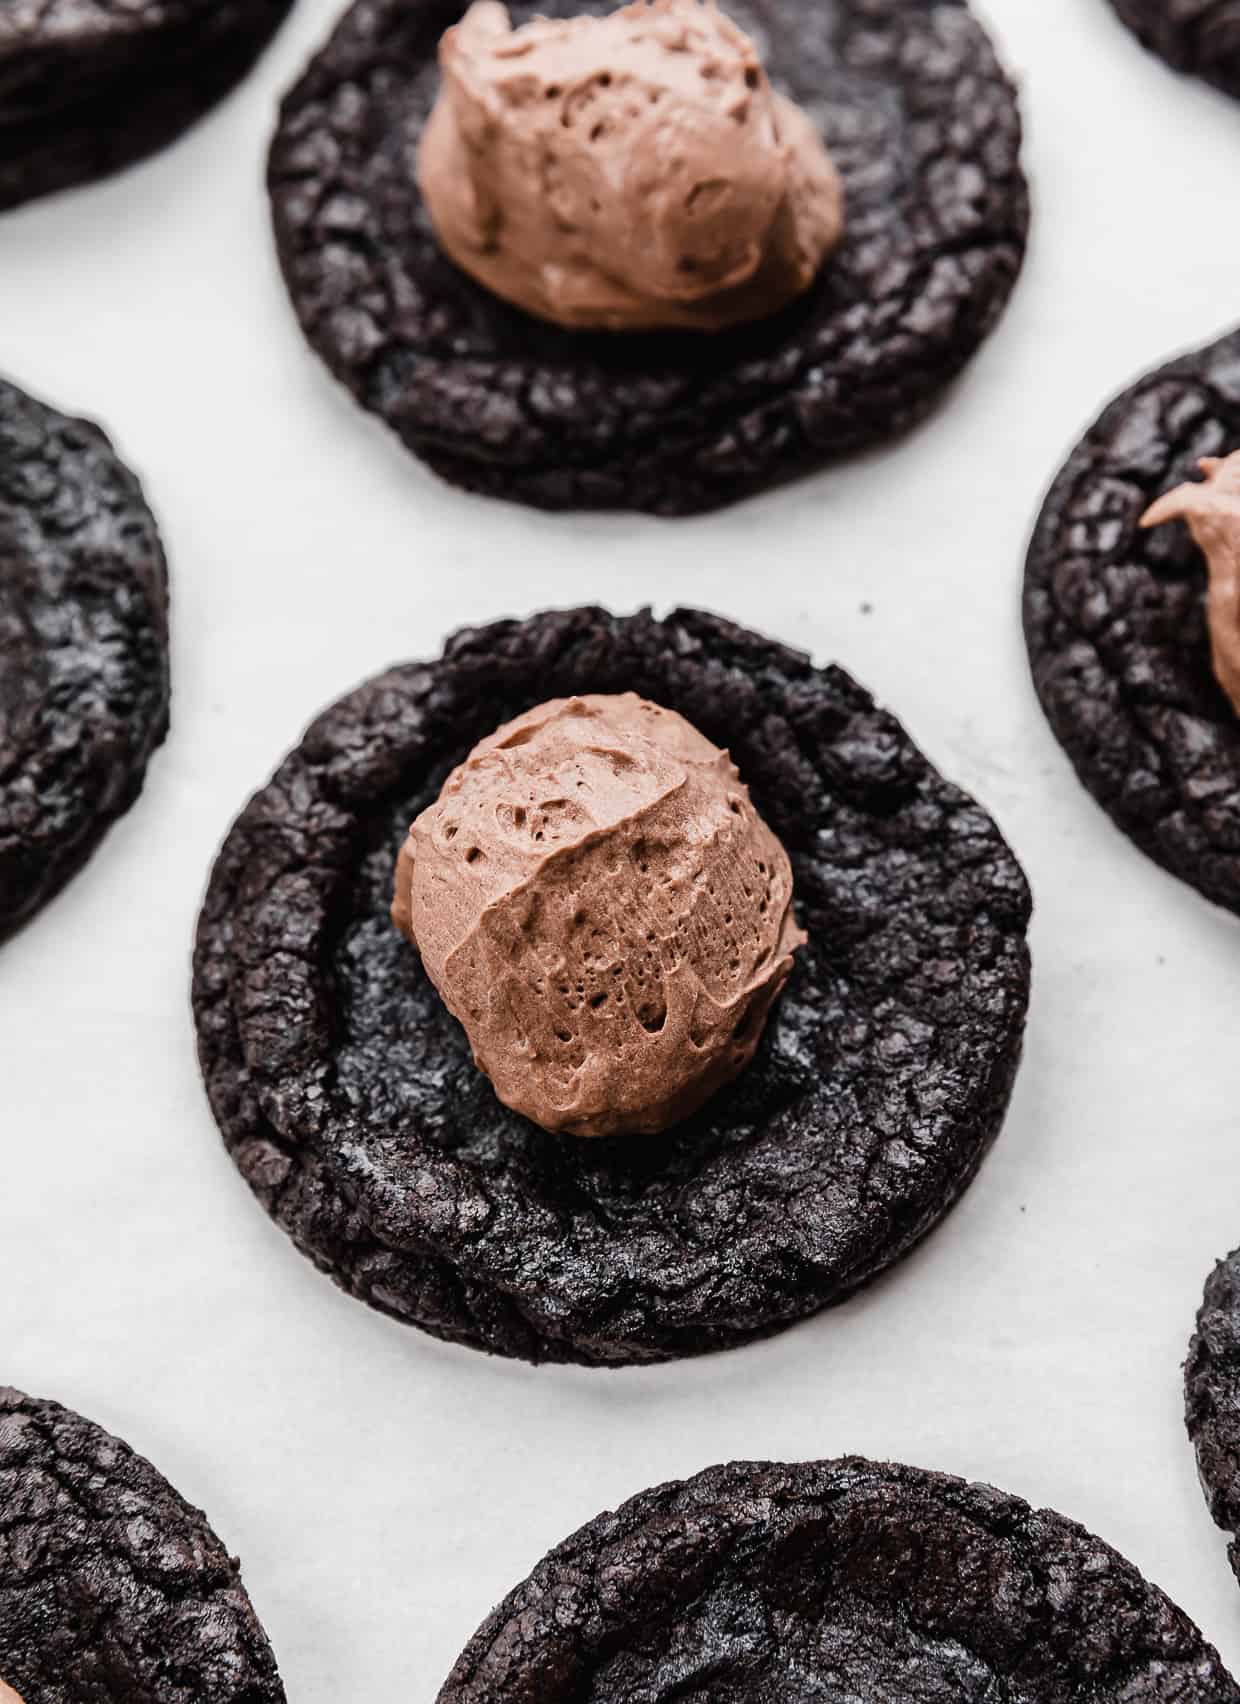 A dollop of chocolate mousse on top of an oreo baked cookie.